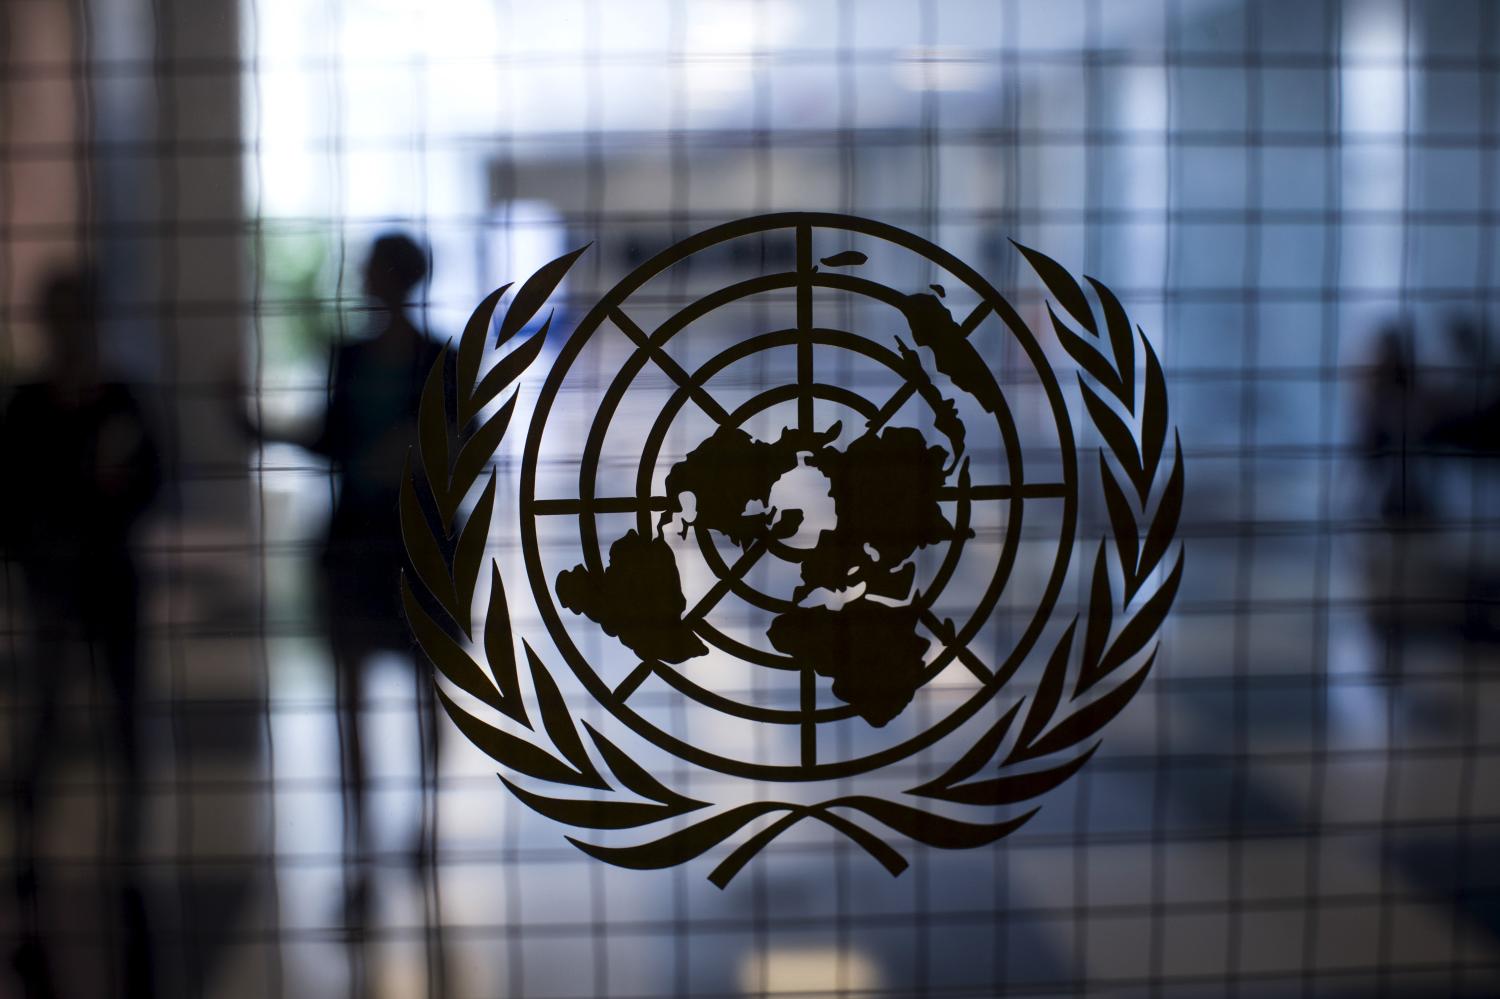 A United Nations logo is seen on a glass door in the Assembly Building at the United Nations headquarters in New York City September 18, 2015. As leaders from almost 200 nations gather for the annual general assembly at the United Nations, the world body created 70 years ago, Reuters photographer Mike Segar documented quieter moments at the famed 18-acre headquarters on Manhattan's East Side. The U.N., established as the successor to the failed League of Nations after World War Two to prevent a similar conflict from occurring again, attracts more than a million visitors every year to its iconic New York site. The marathon of speeches and meetings this year will address issues from the migrant crisis in Europe to climate change and the fight against terrorism. REUTERS/Mike SegarPICTURE 13 OF 30 FOR WIDER IMAGE STORY "INSIDE THE UNITED NATIONS HEADQUARTERS"SEARCH "INSIDE UN" FOR ALL IMAGES  - GF10000219225